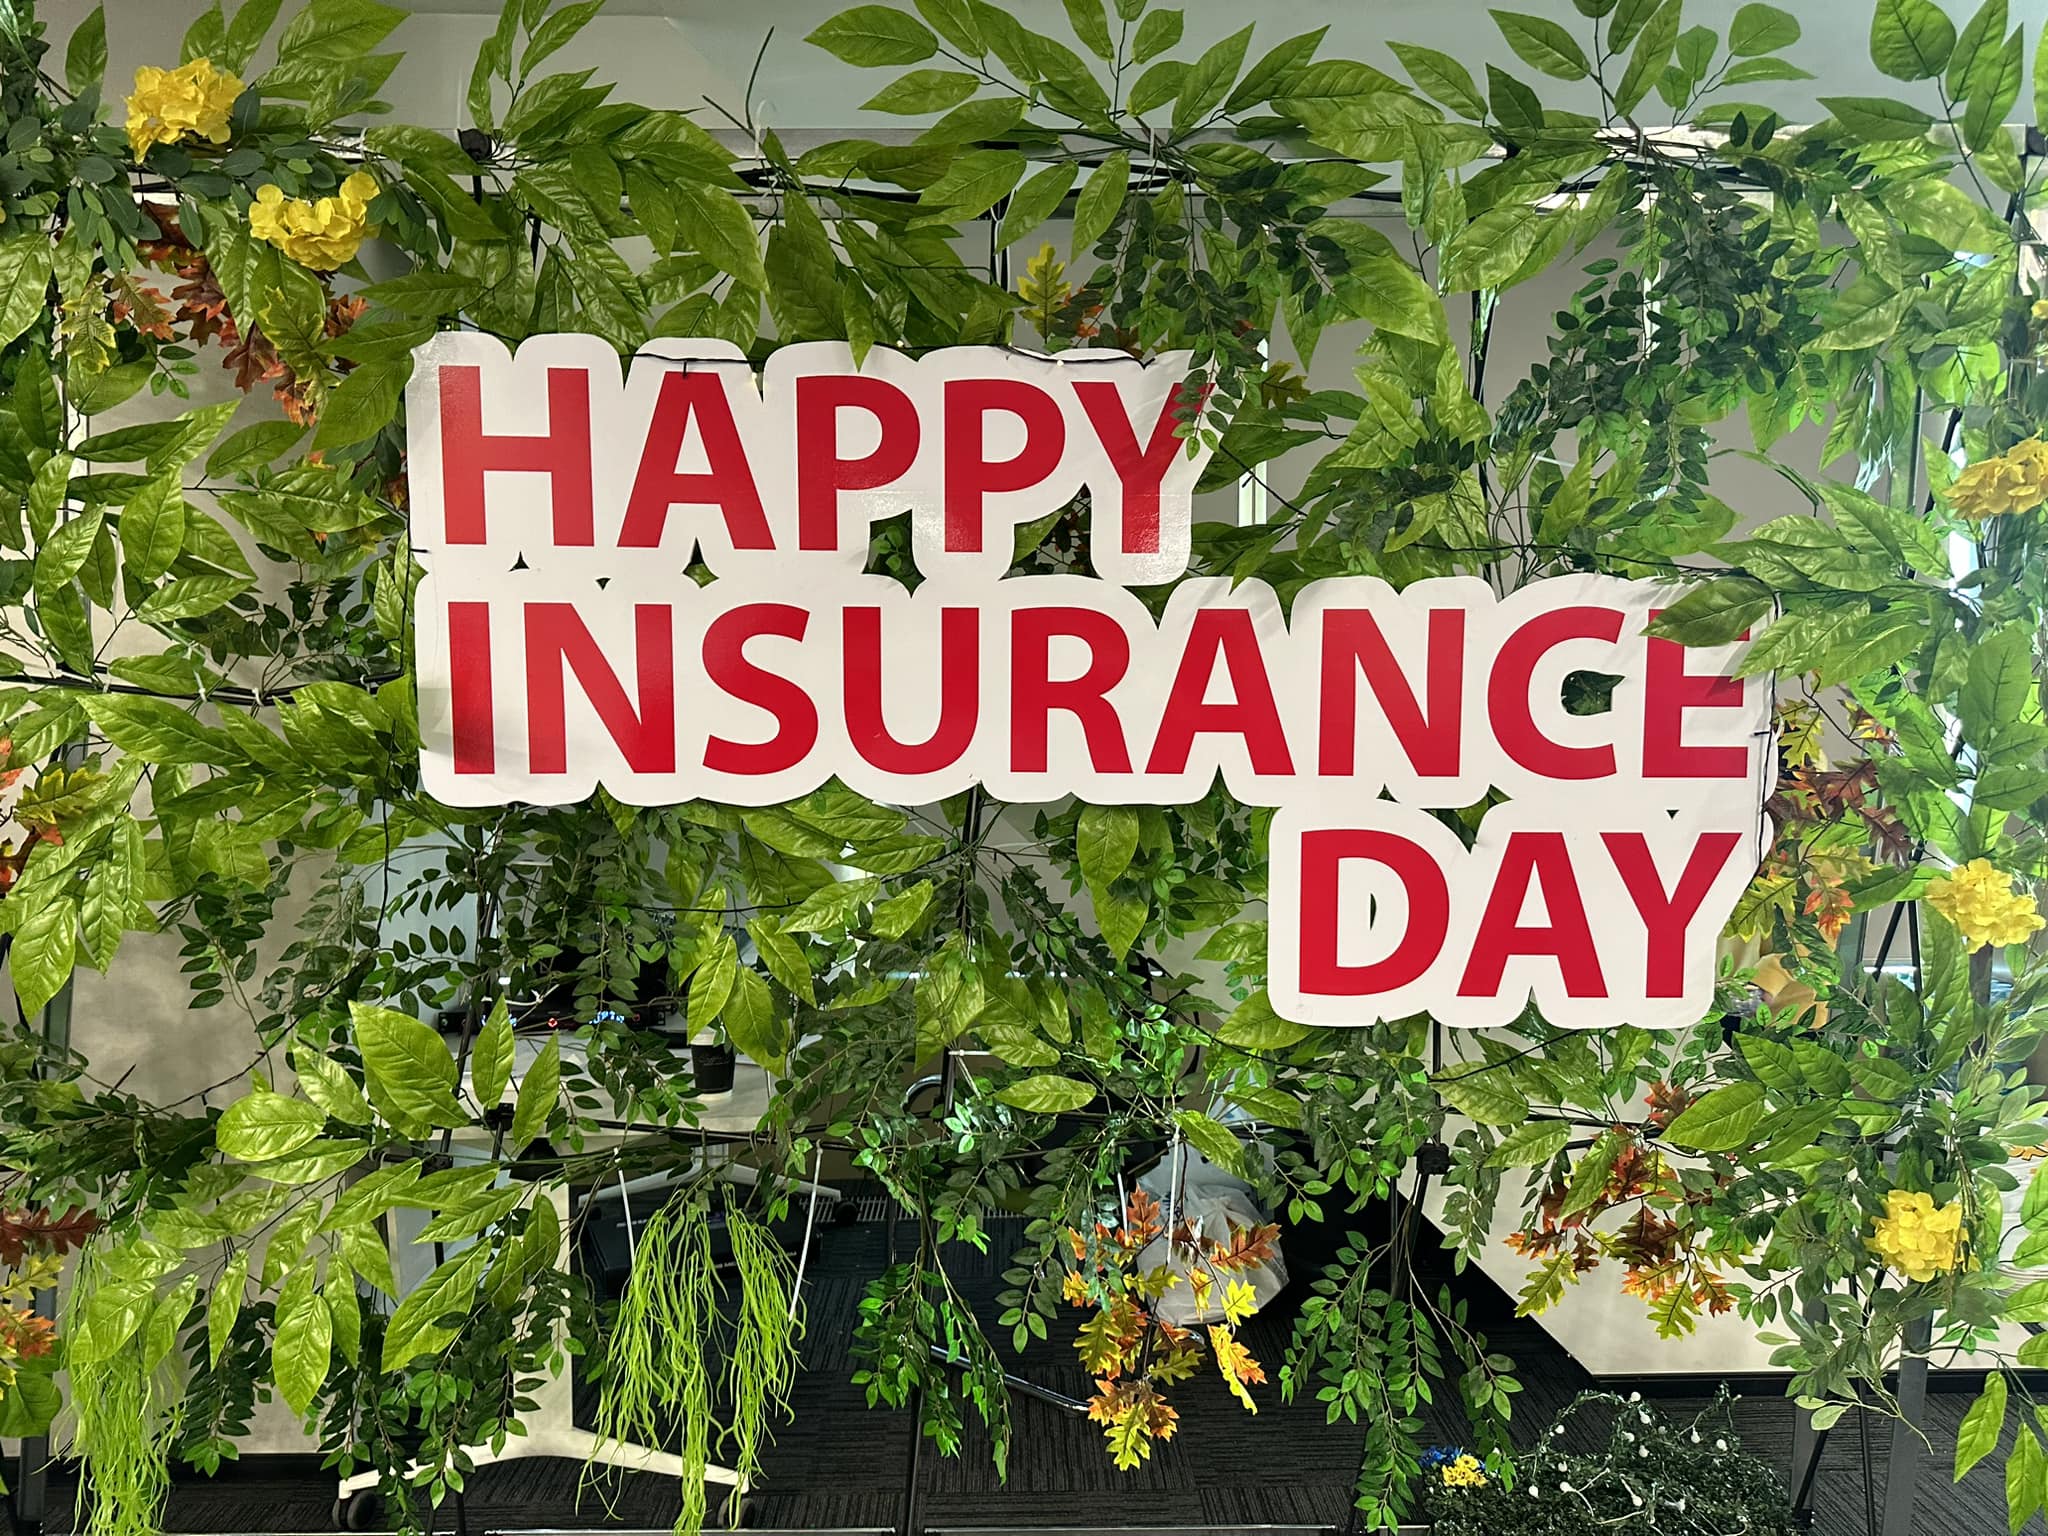 Happy Insurance Day by Khan Bank